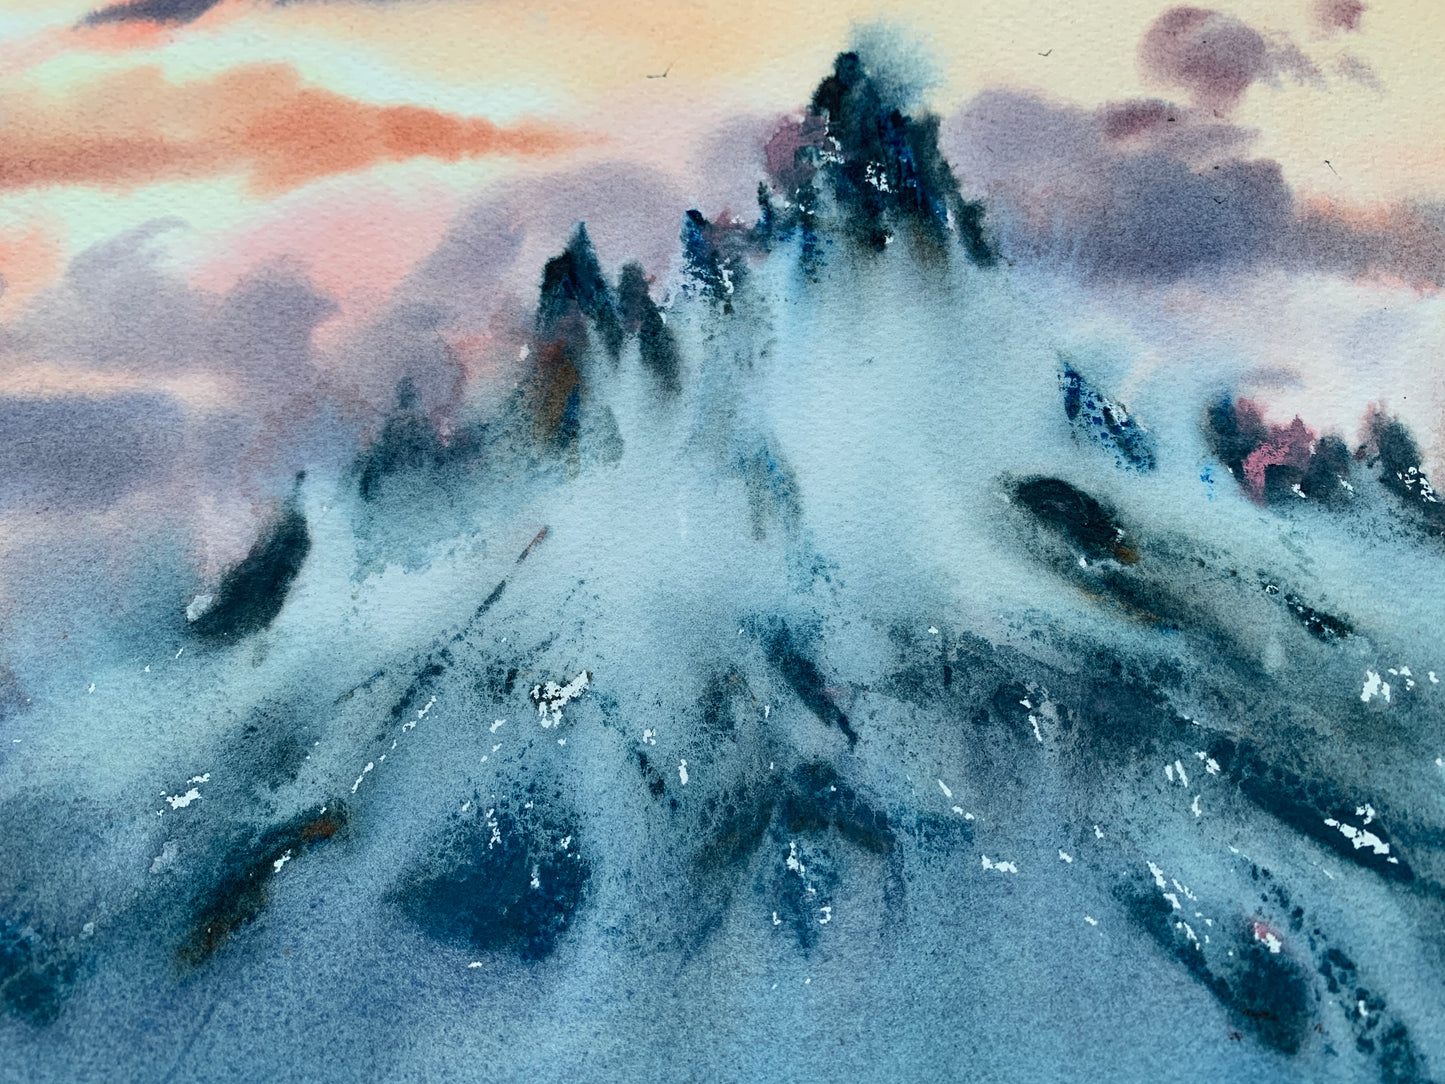 Mountain Original Painting Watercolor - Mountainscape with orange sunset - 15 x 22 in